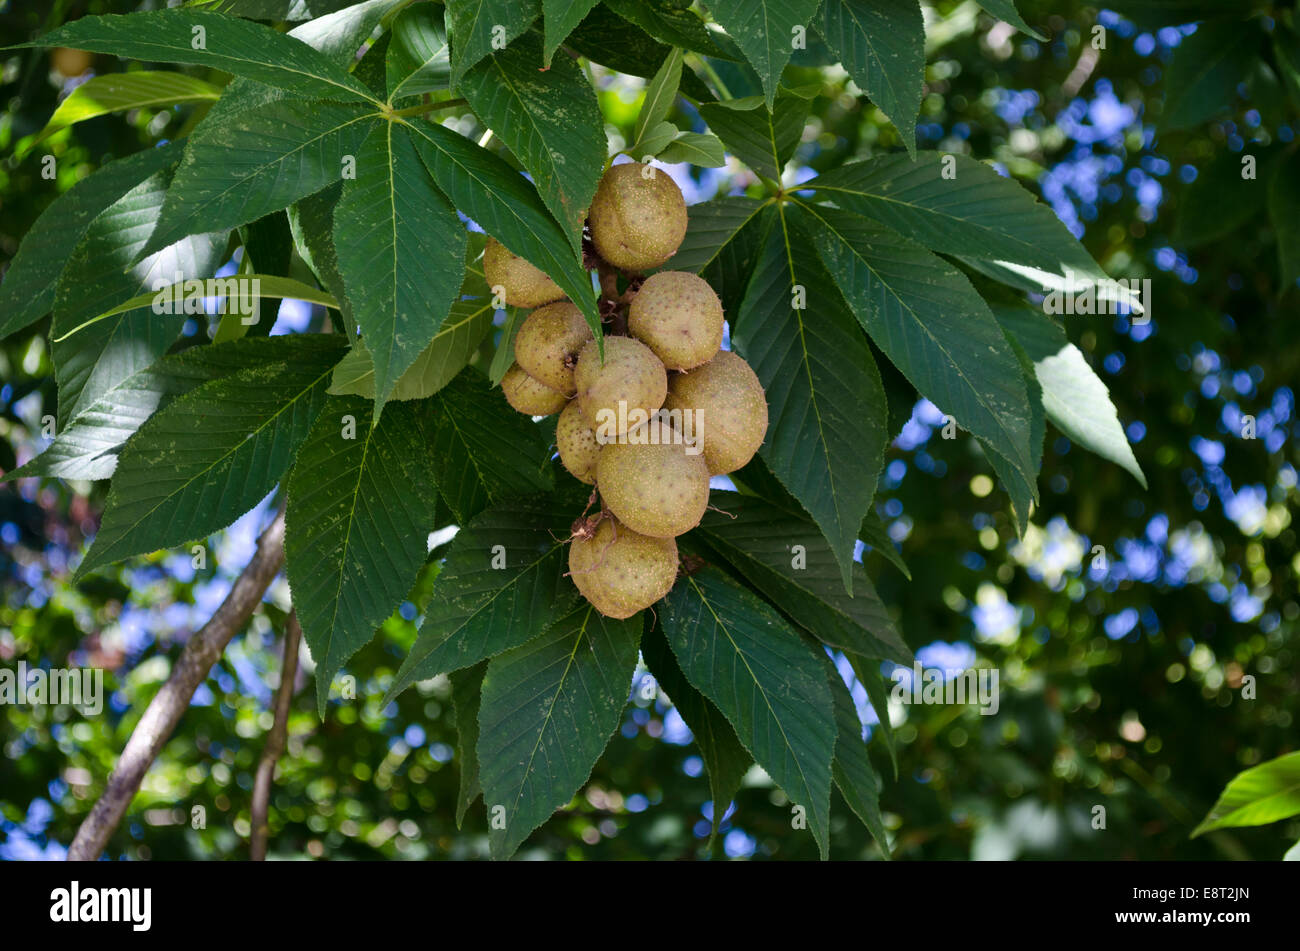 ohio-buckeye-aesculus-glabra-with-fruit-growing-on-its-tree-branches-E8T2JN.jpg